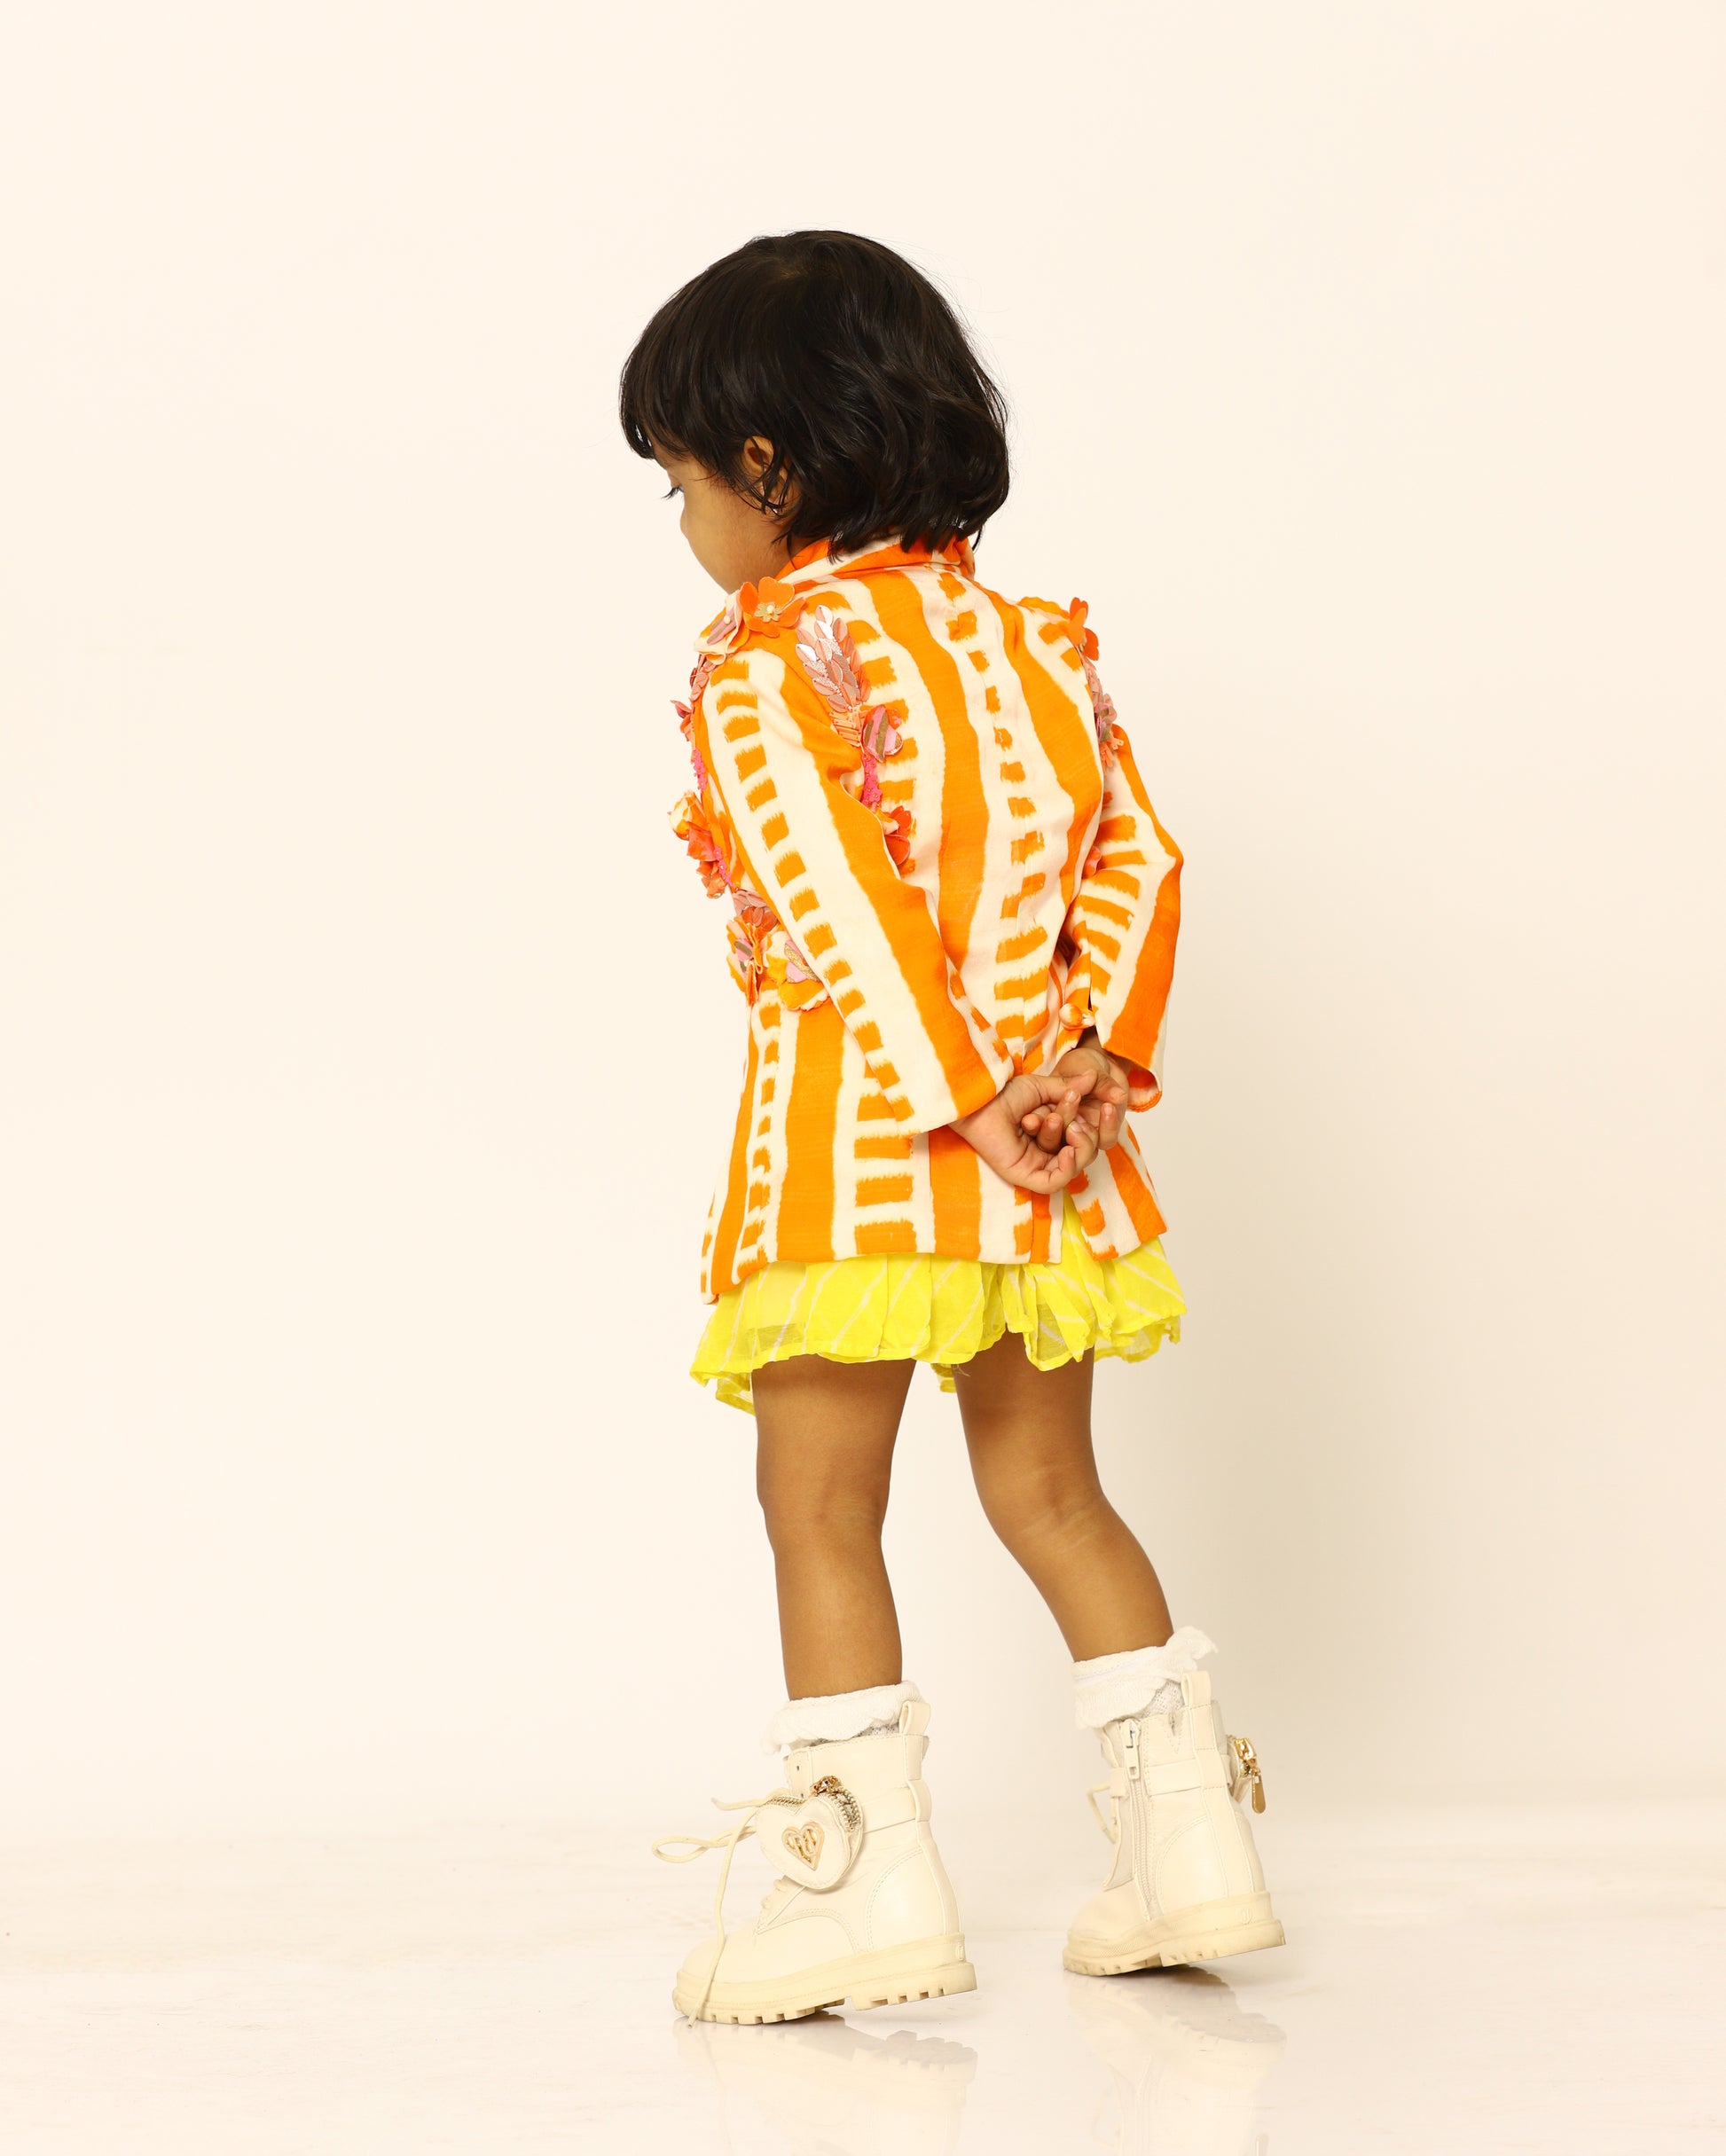 orange + candy + blazer + striped + flowers + yellow + striped + co - ord + bow + socks + shoe + party + cheerful + jump + back